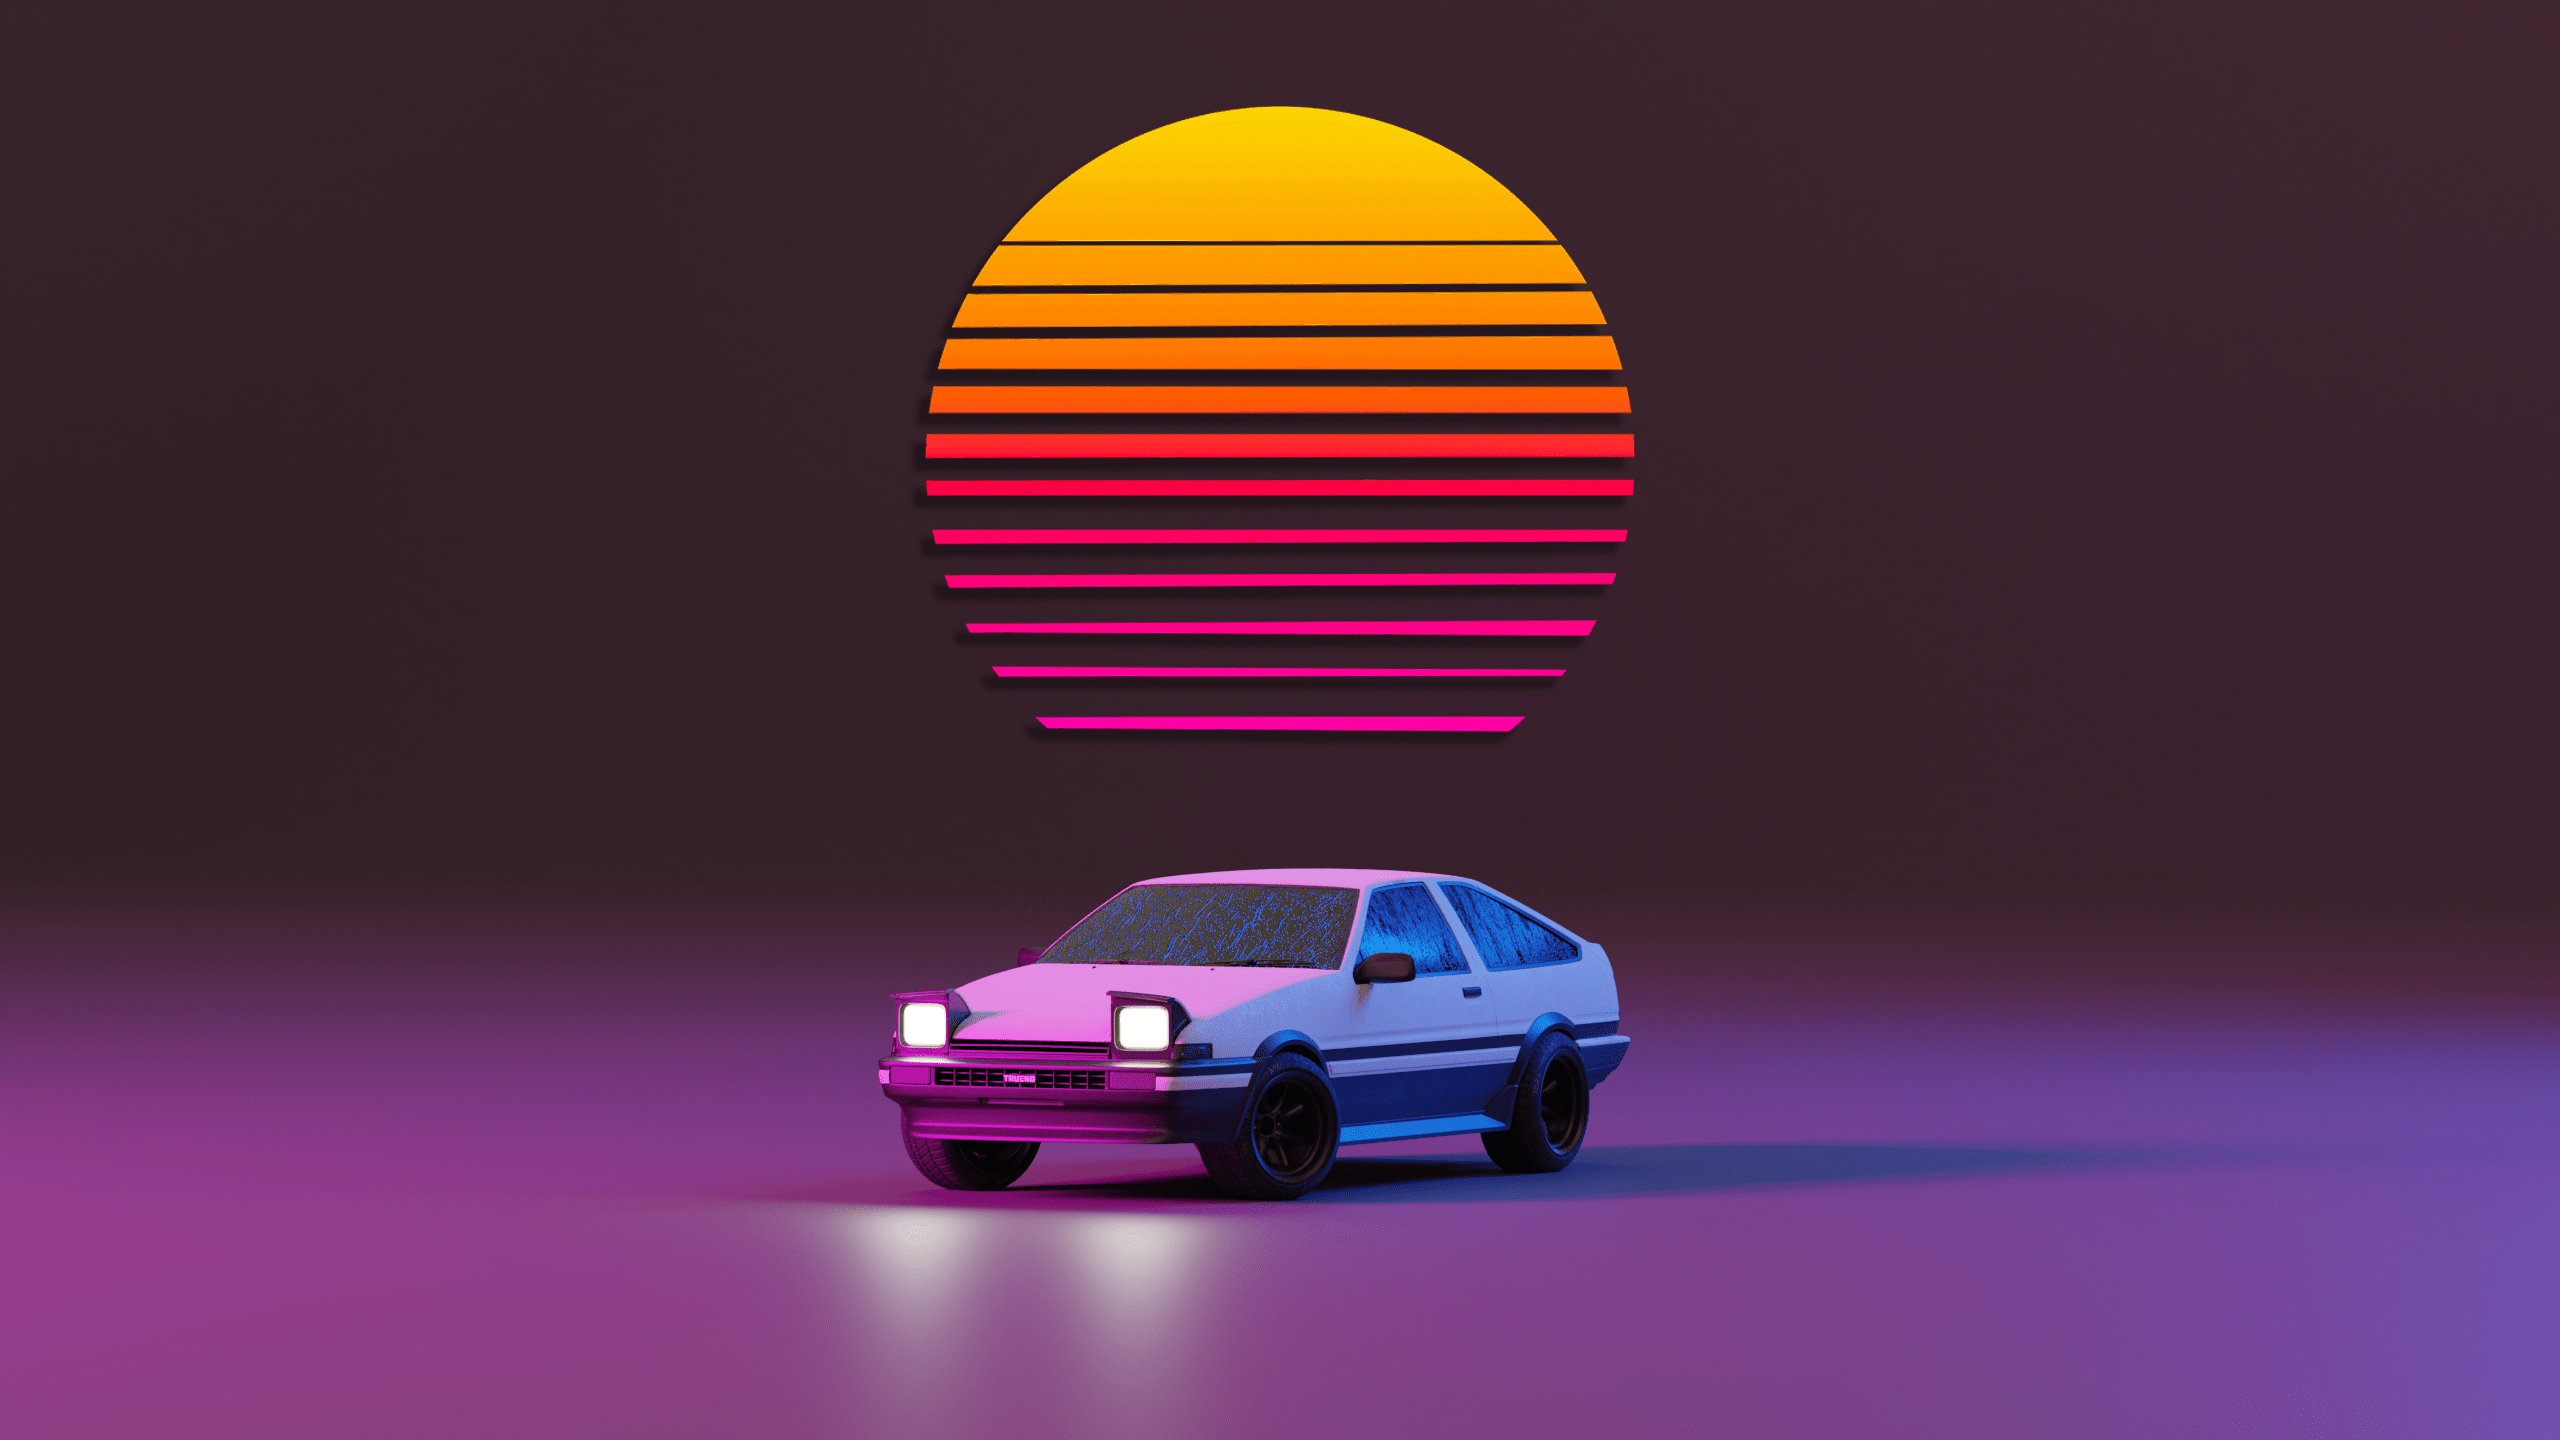 A car in front of a sun - Toyota AE86